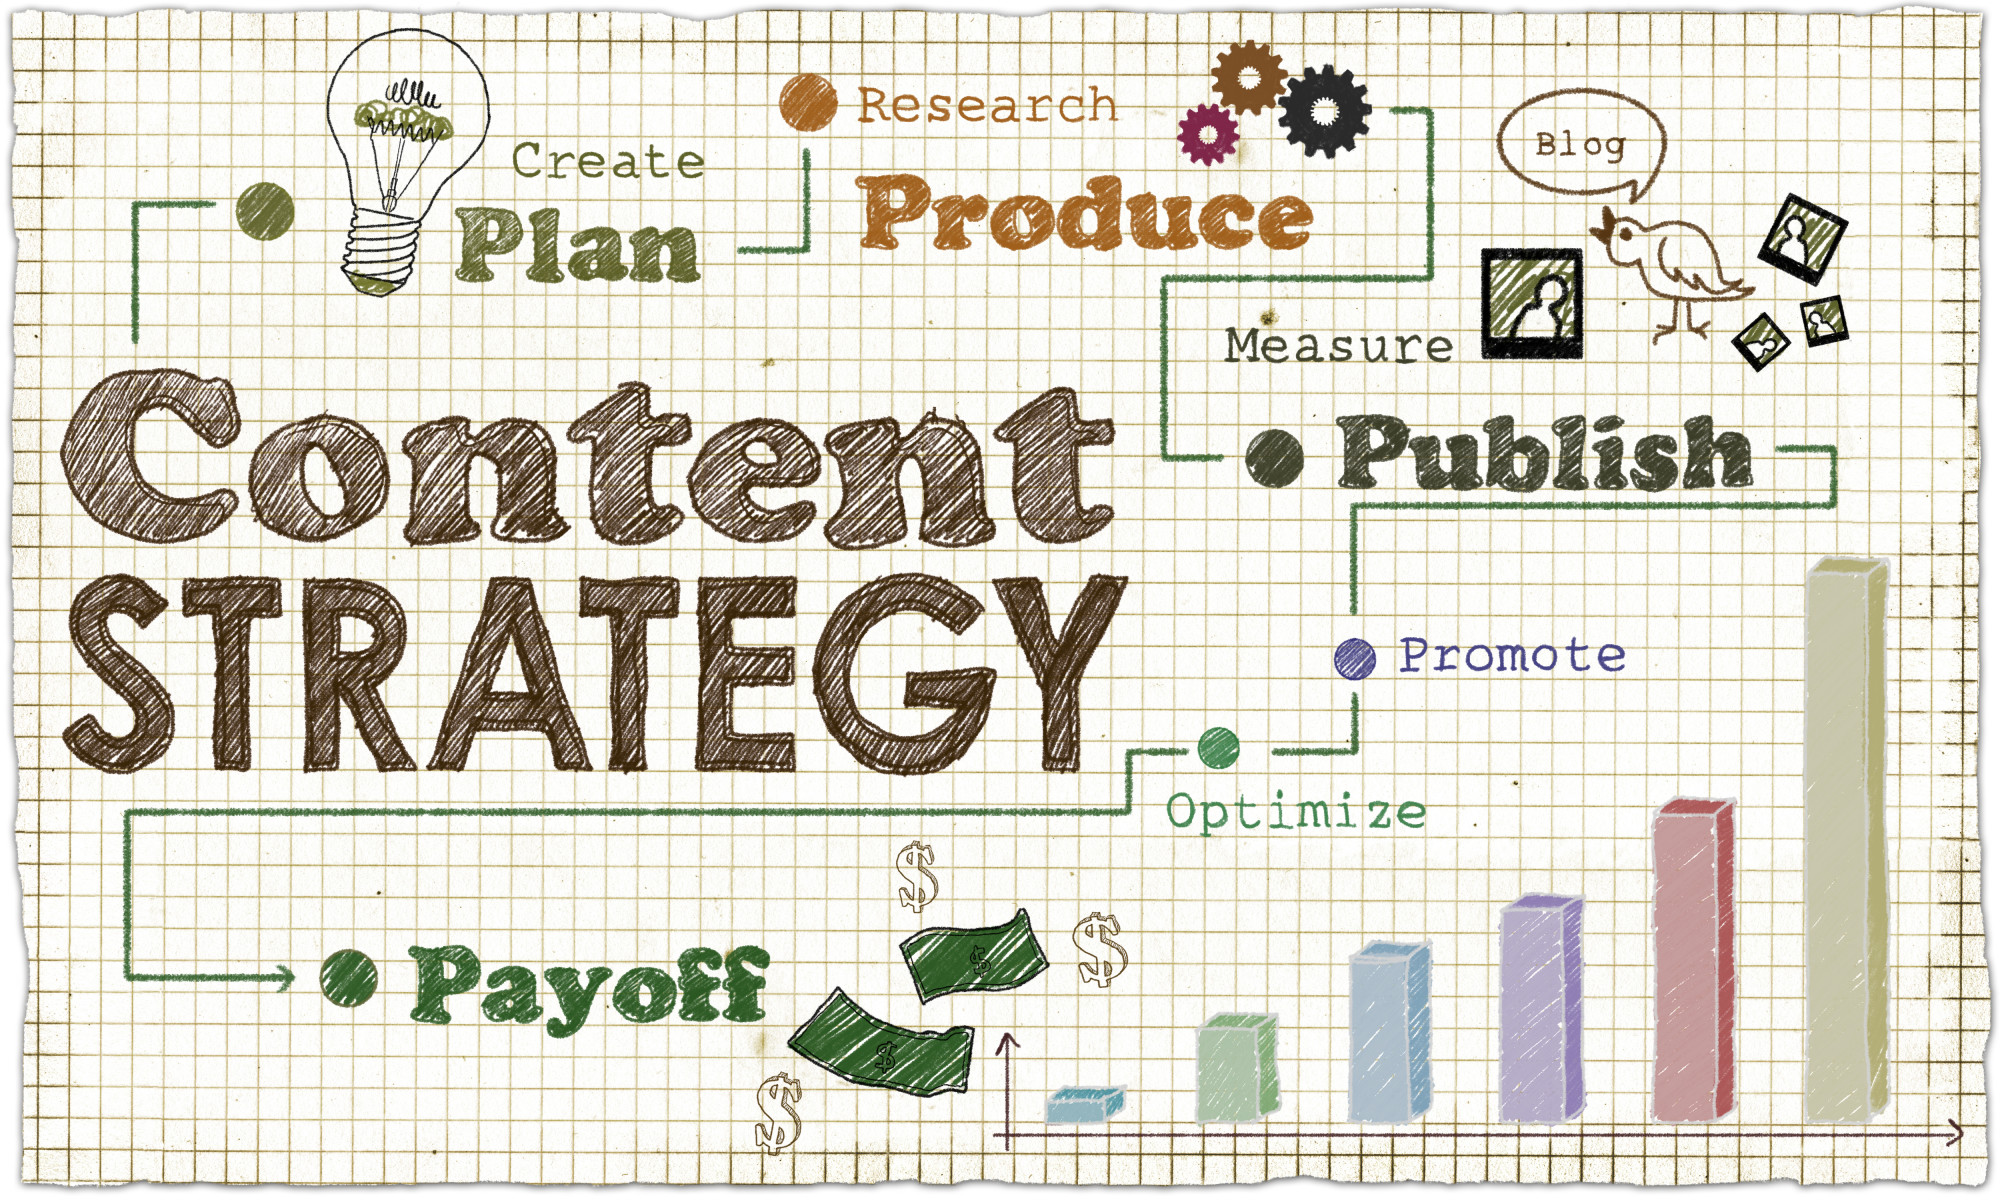 How To Develop a Content Marketing Strategy